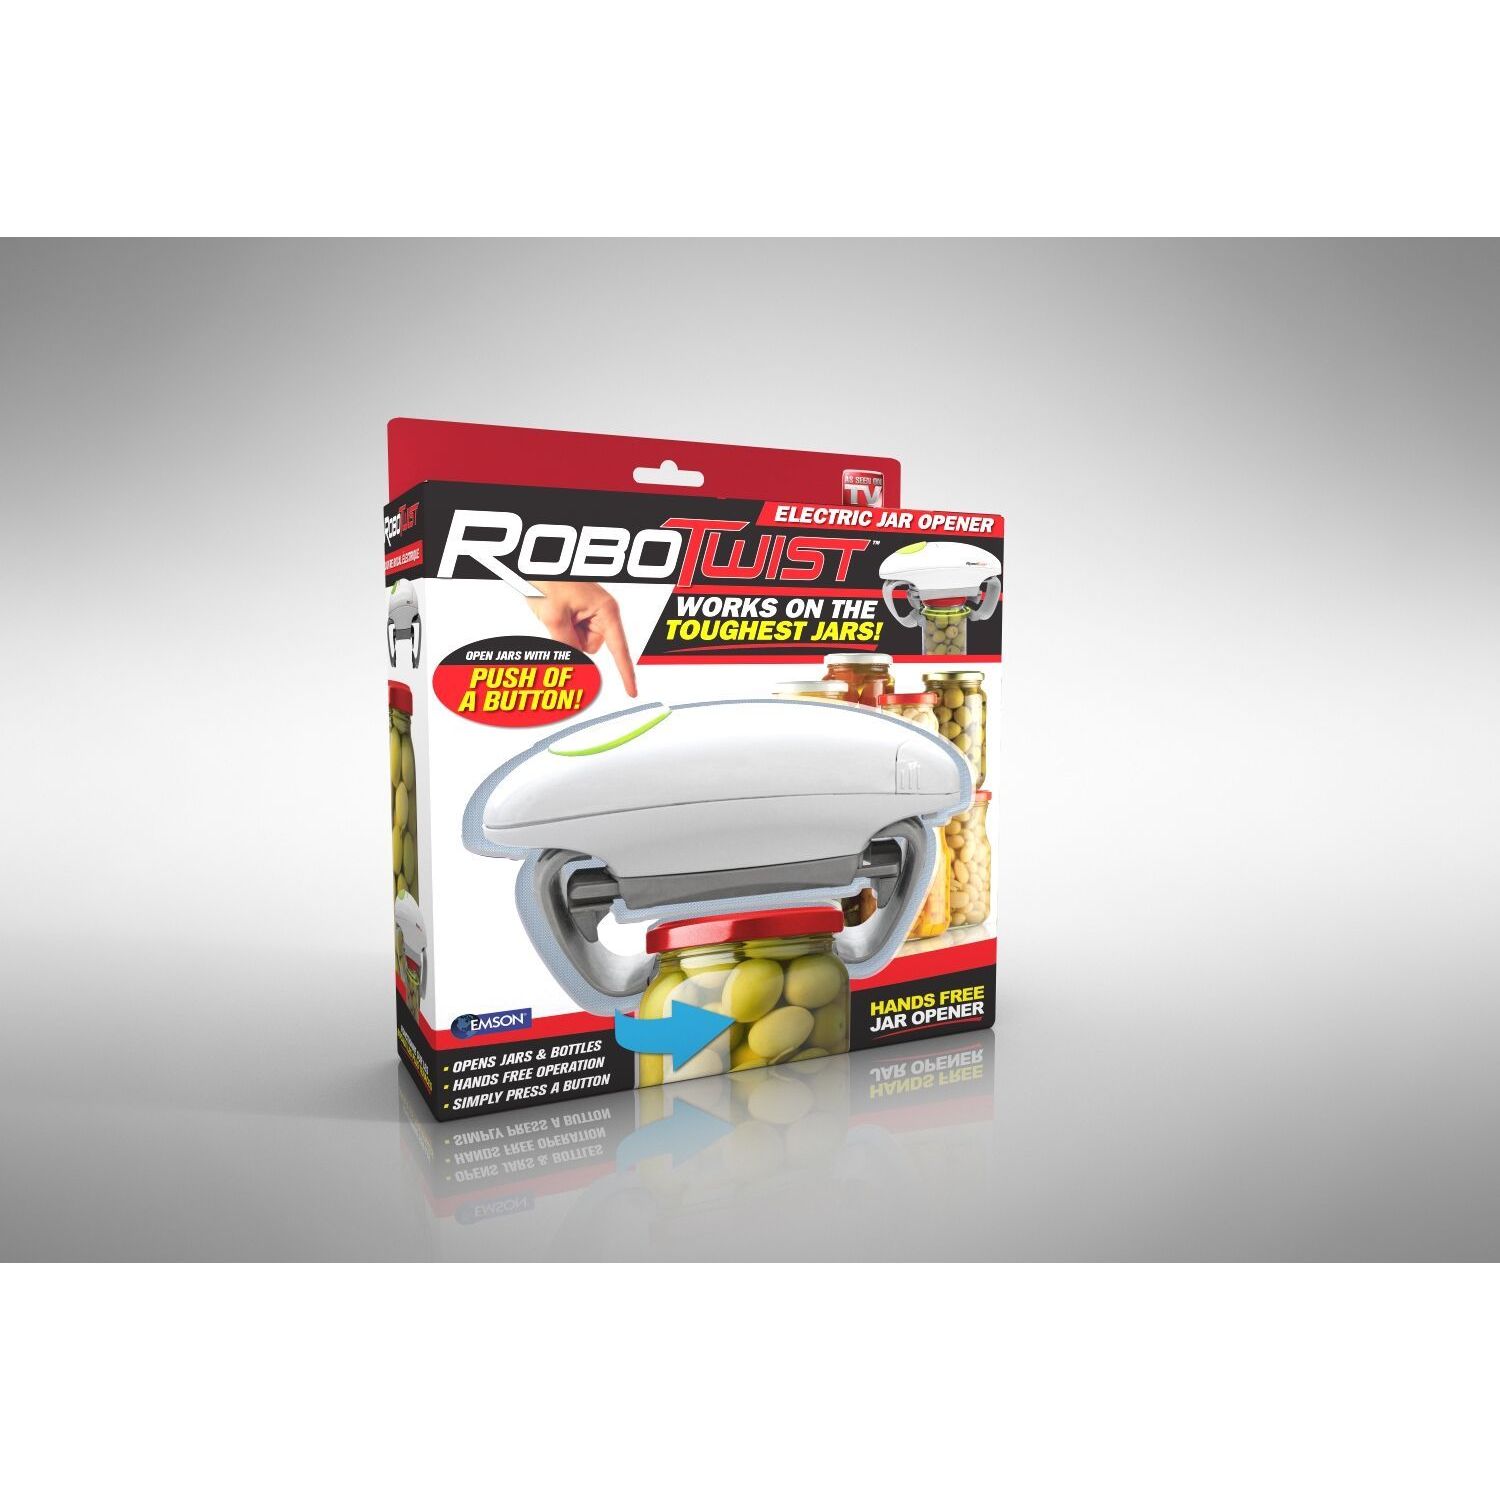 ROBO TWIST Electric Jar Opener/PushButton-As Seen On TV-Hands Free